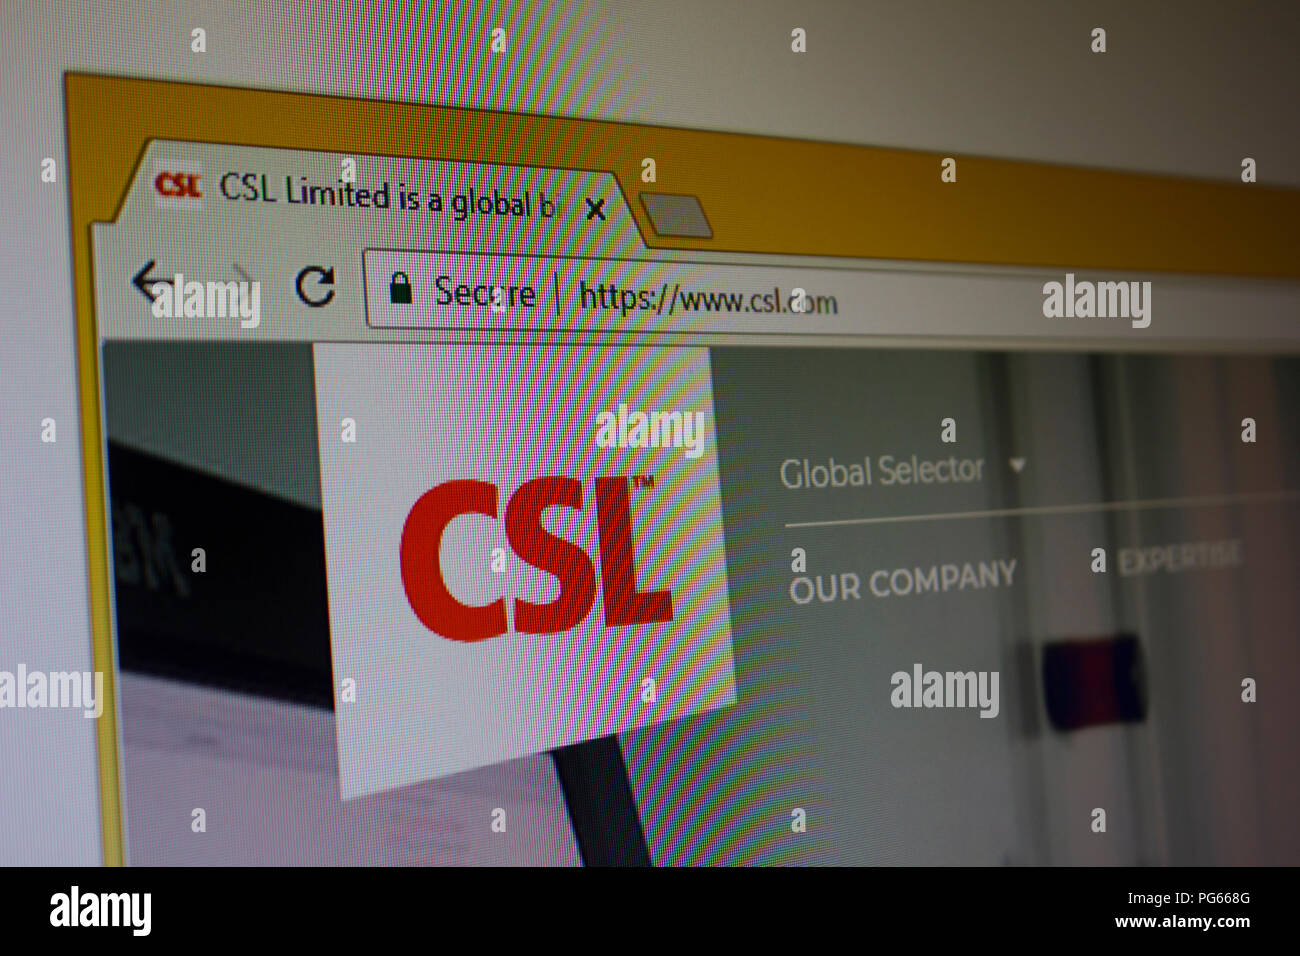 CSL Limited Website homepage Stock Photo